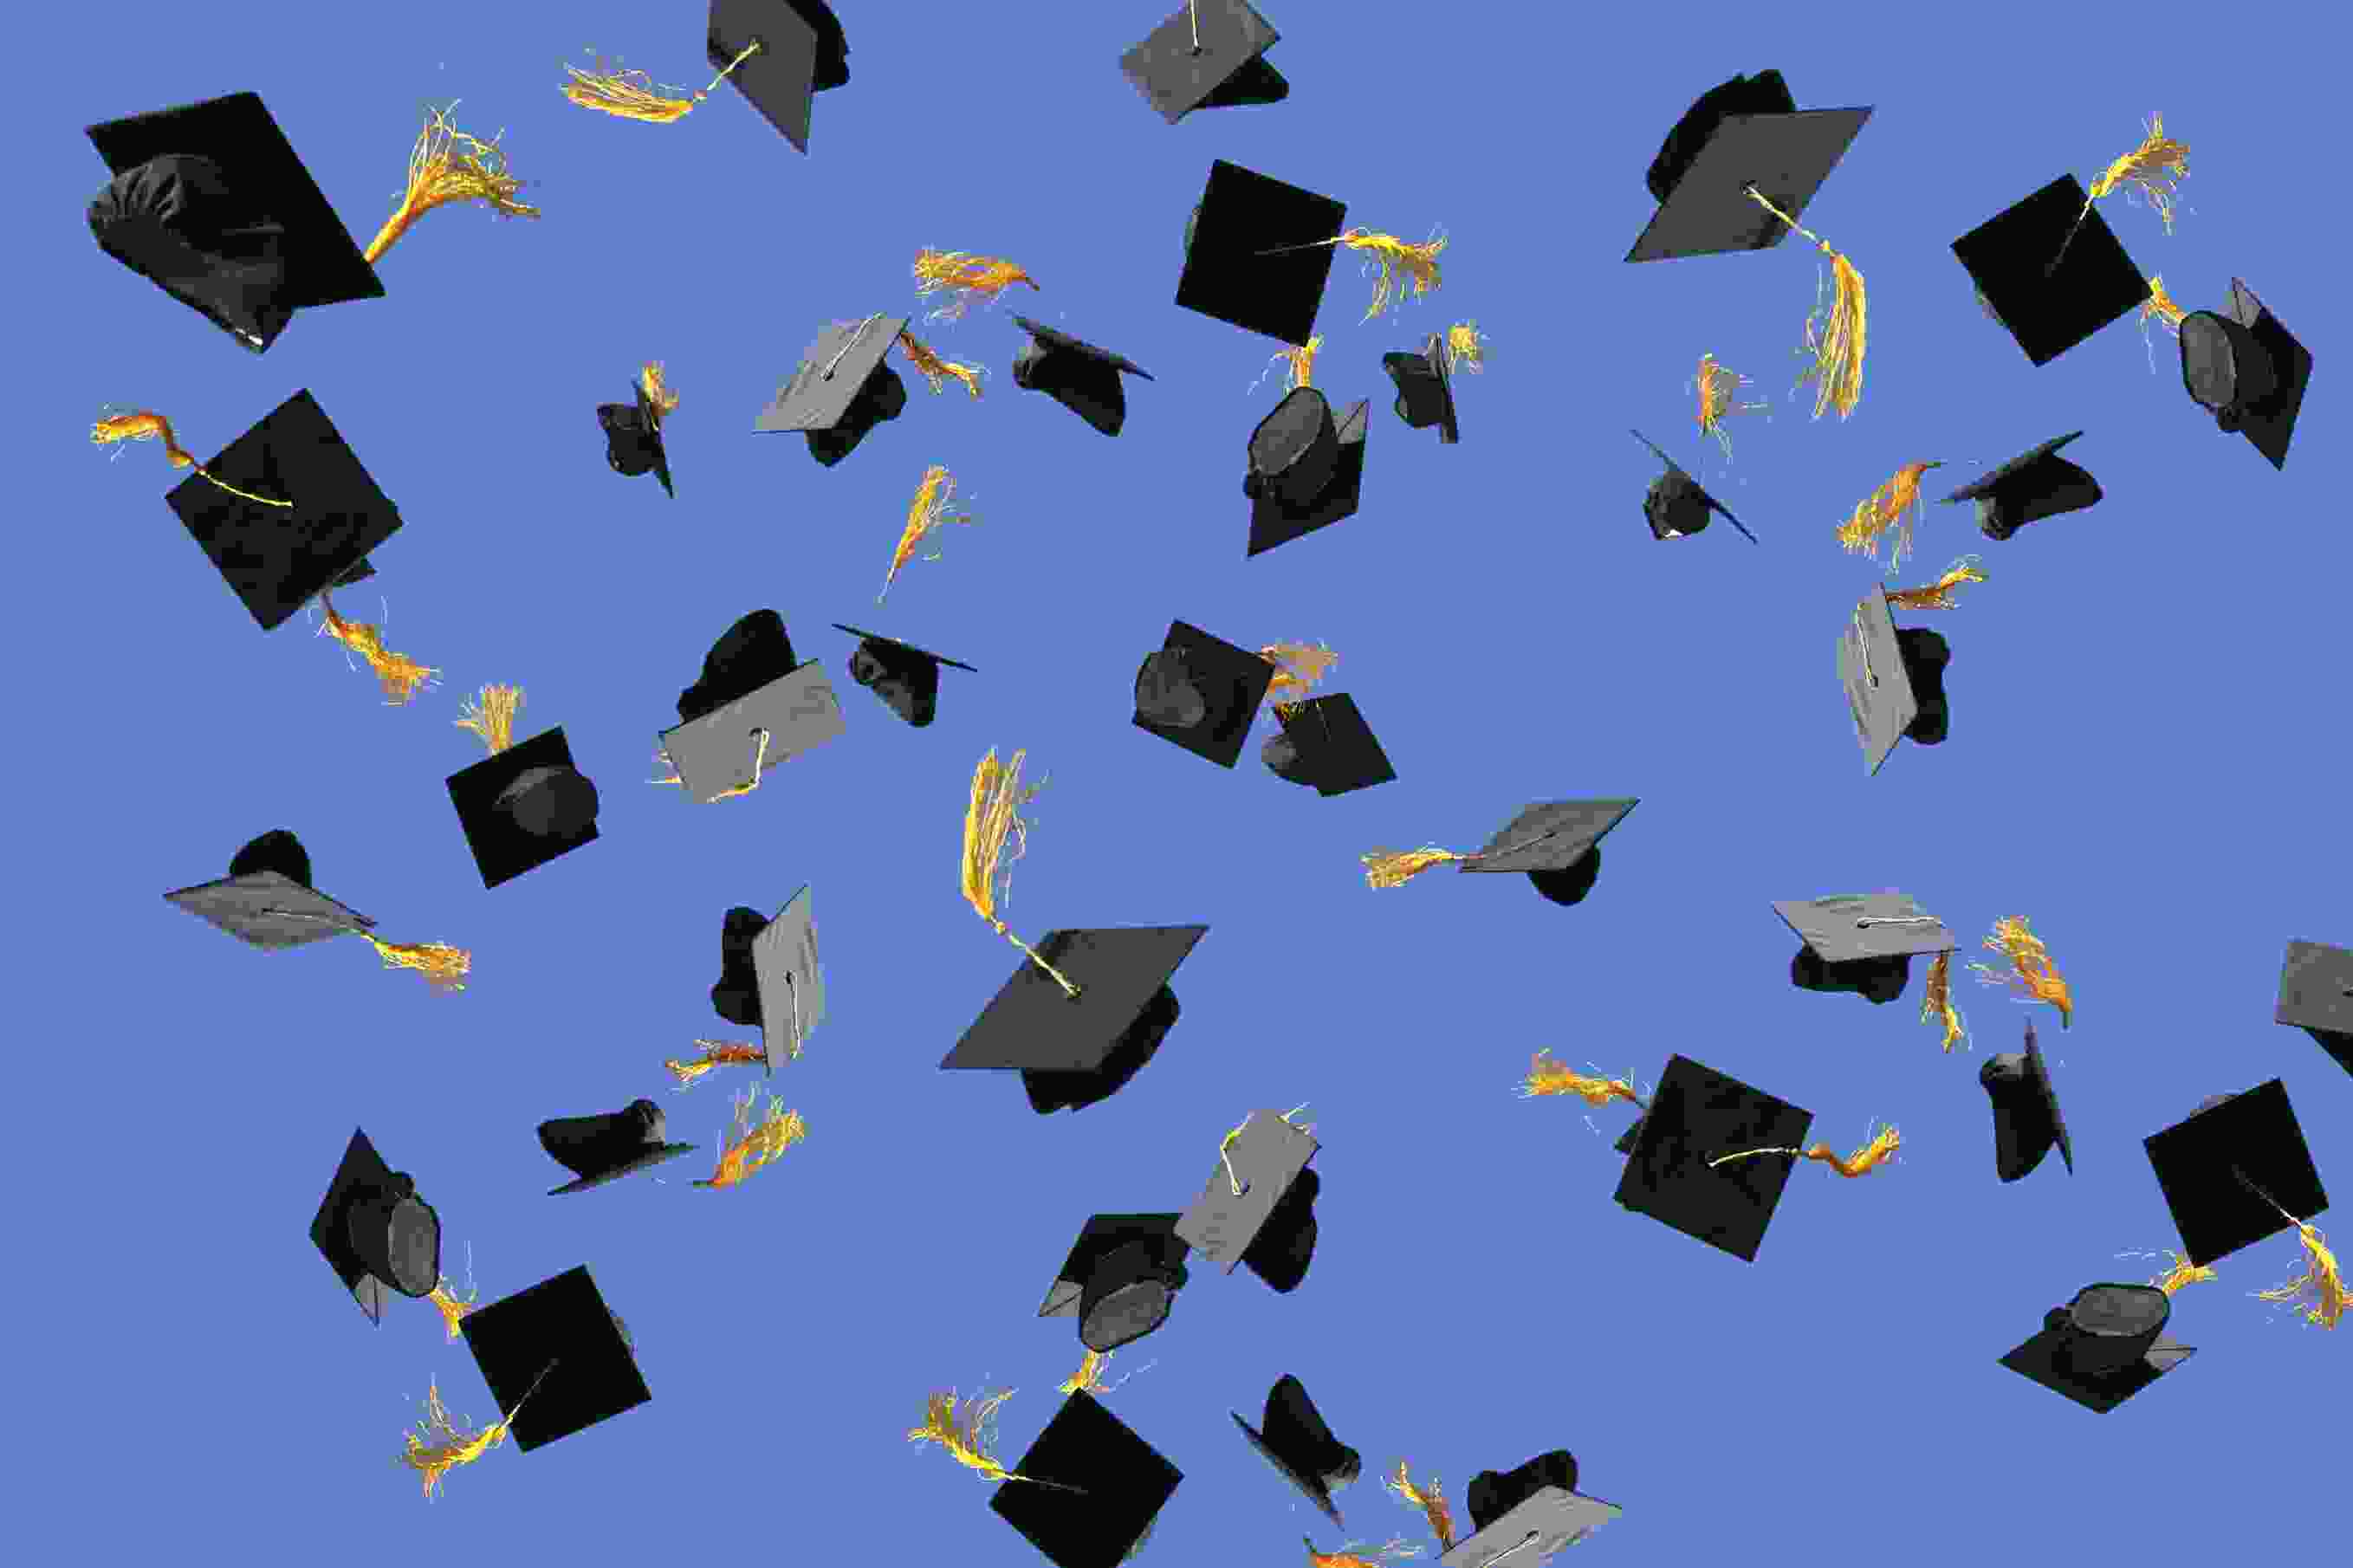 7 MustHave Ideas for Graduation Slideshow[2023]